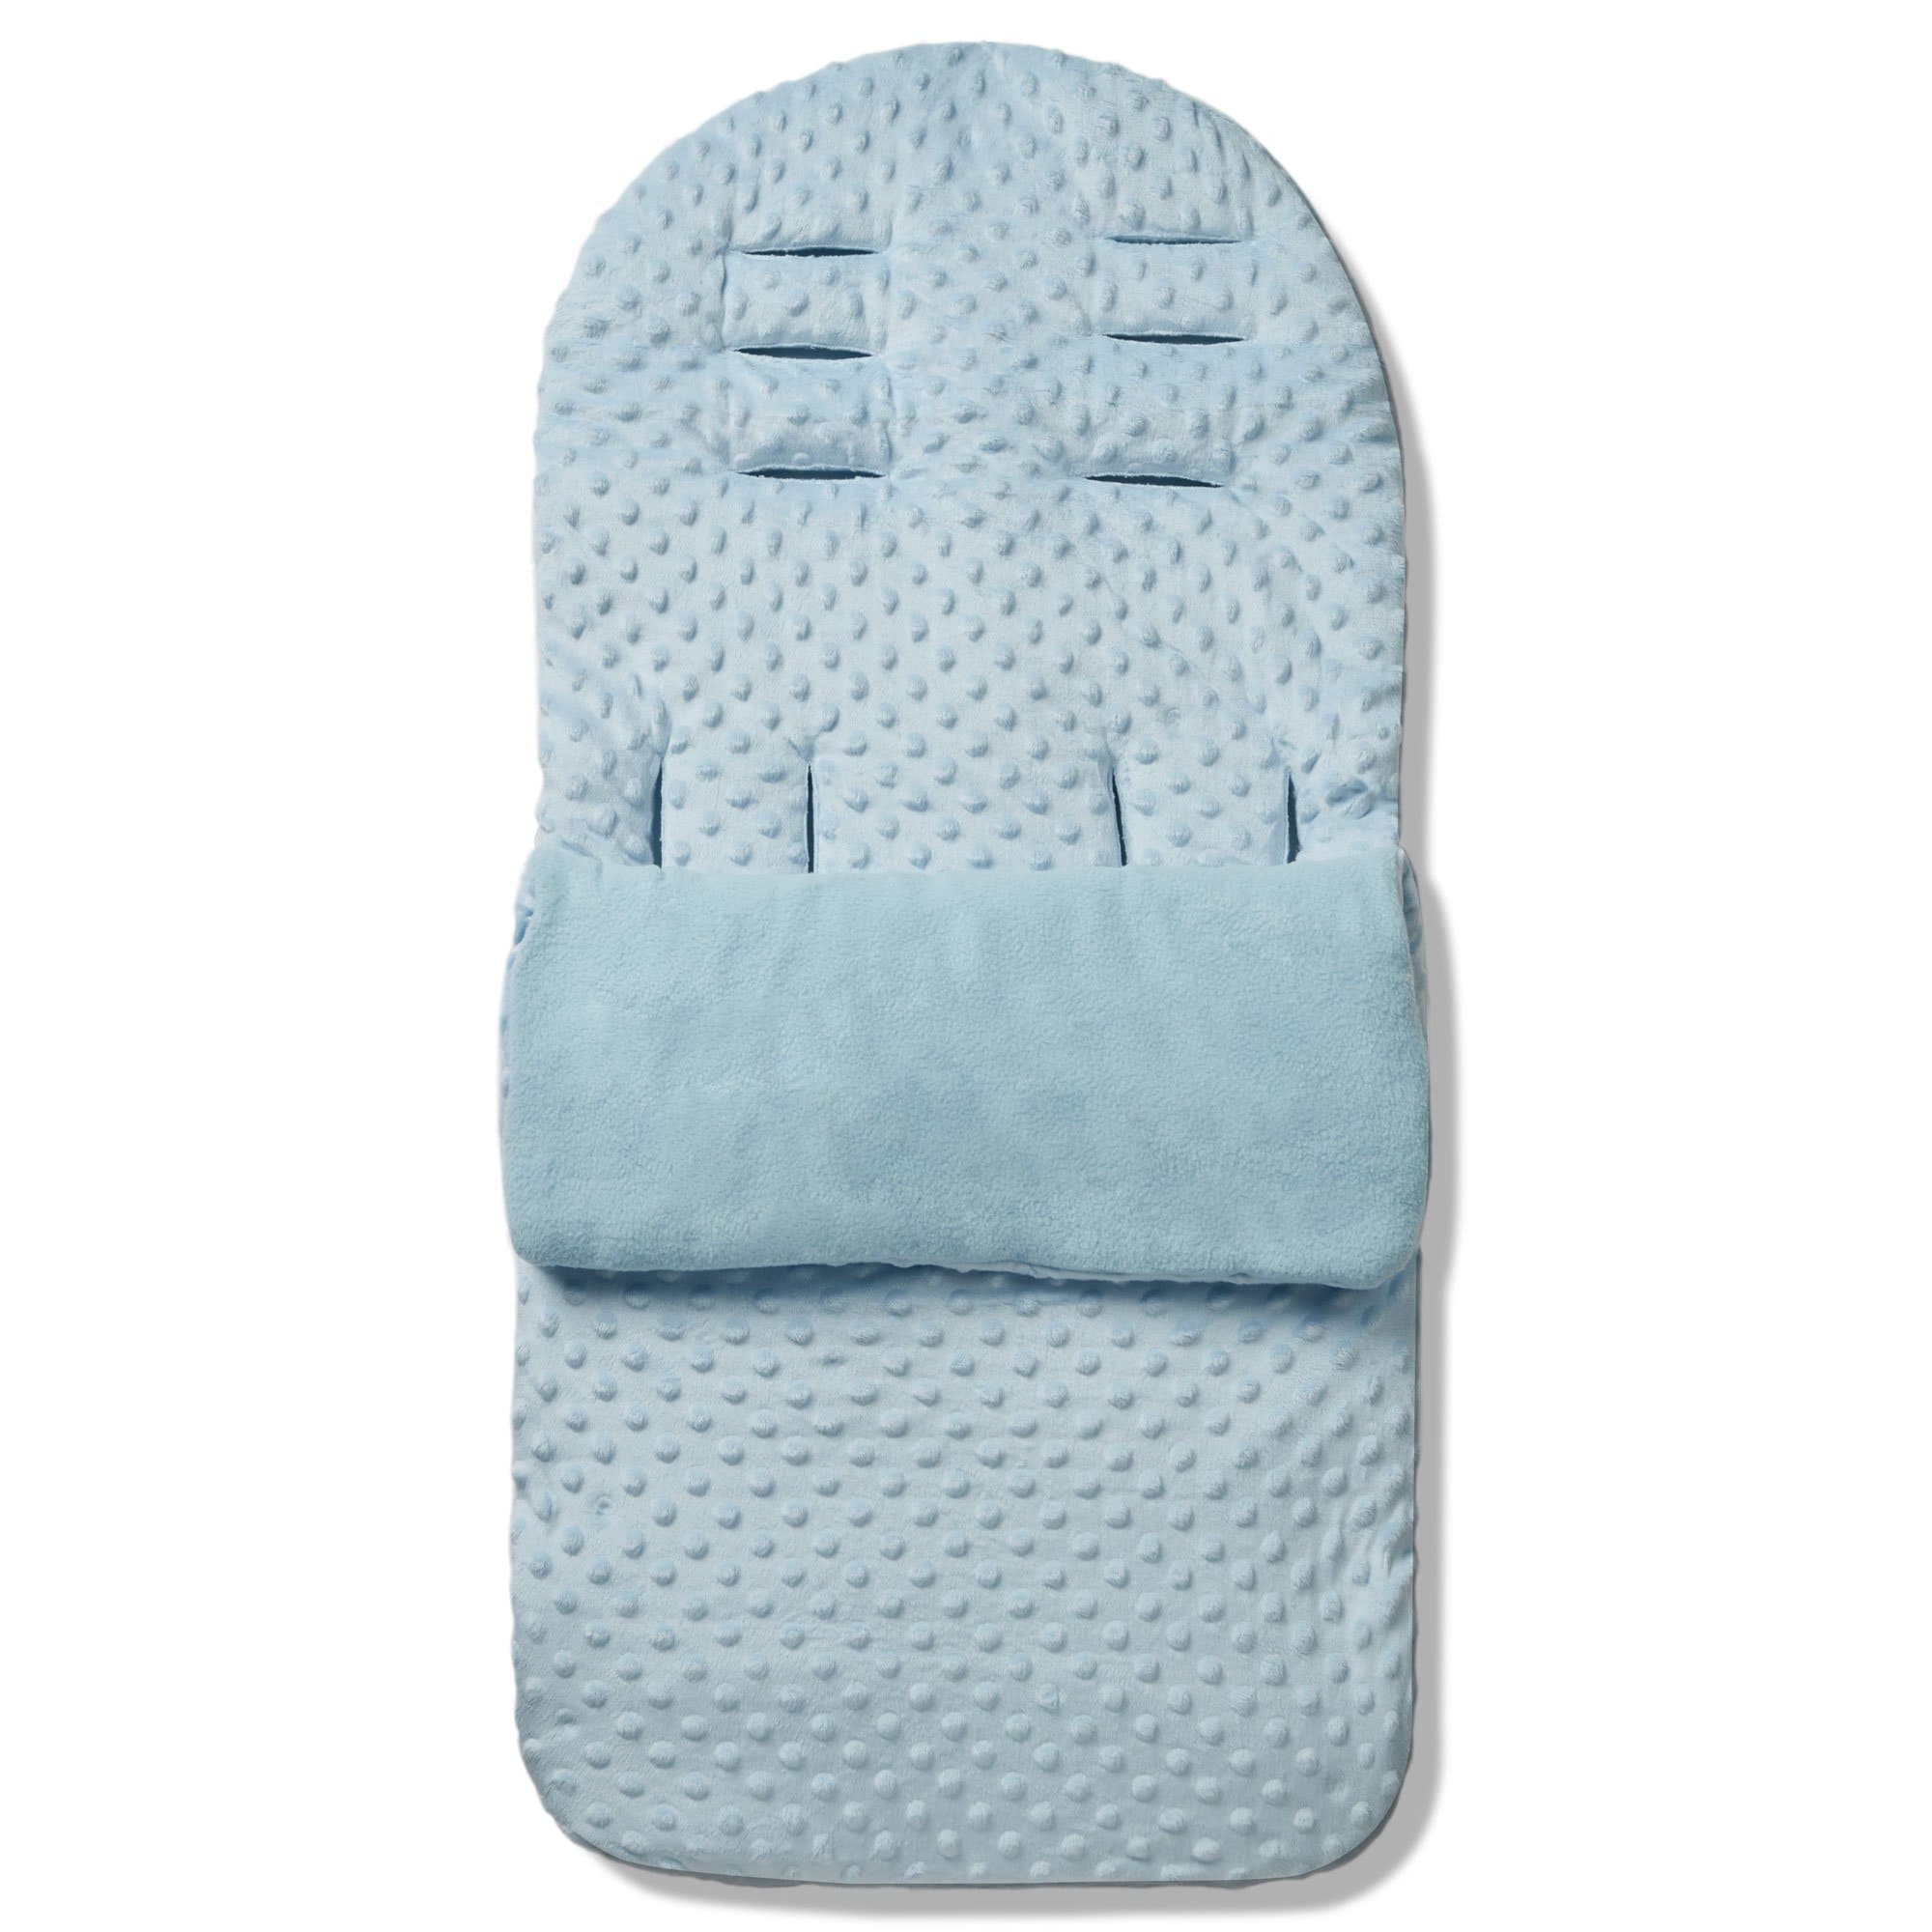 Dimple Footmuff / Cosy Toes Compatible with BOB - Blue / Fits All Models | For Your Little One